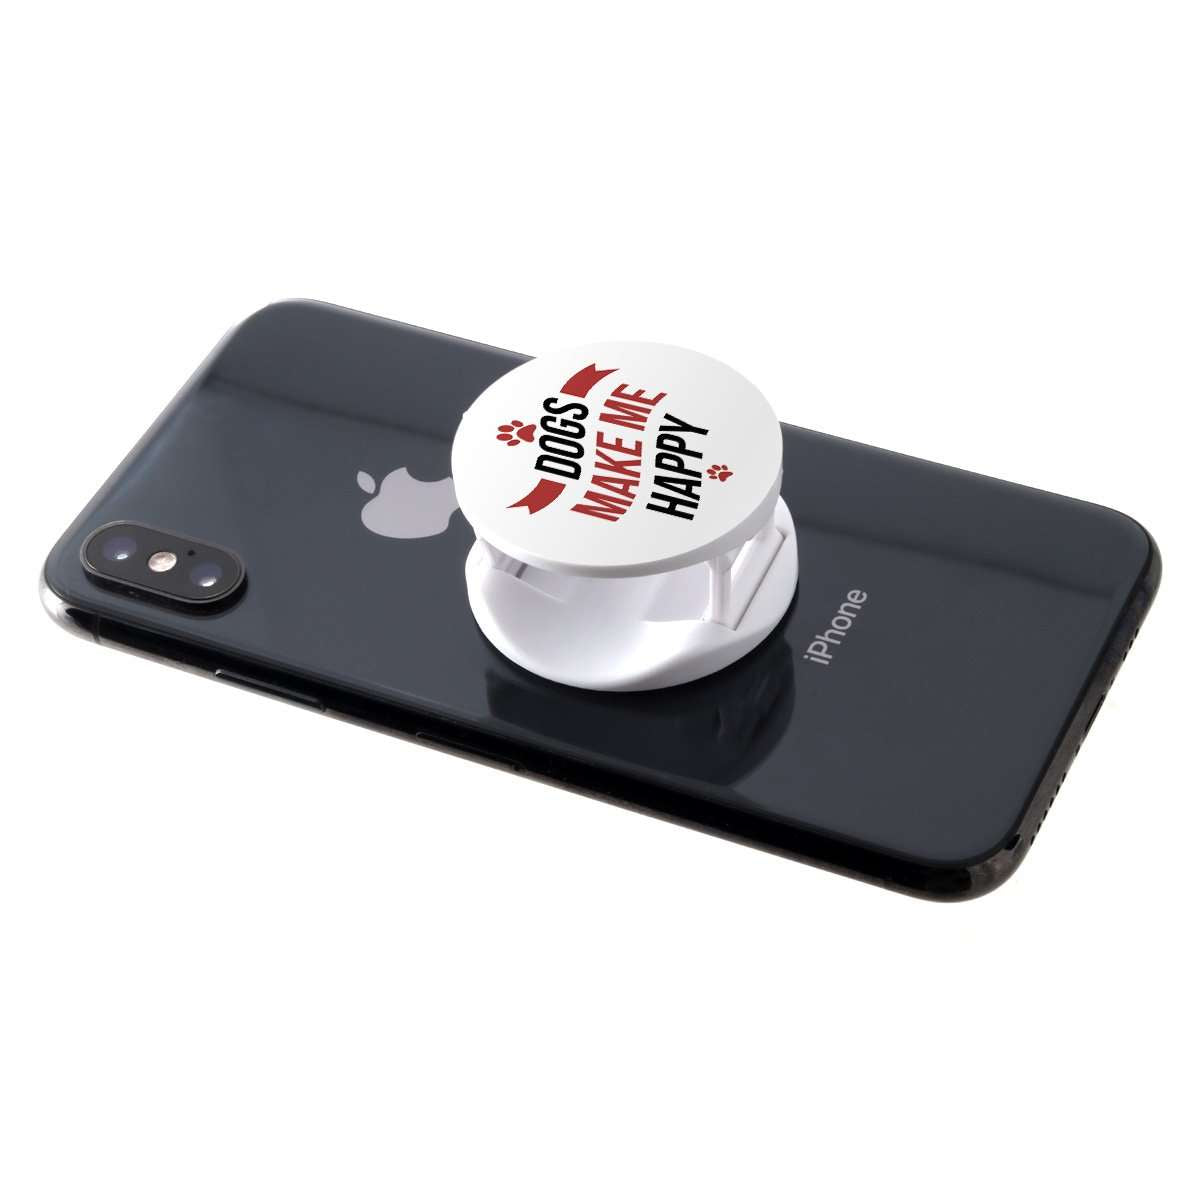 Designs by MyUtopia Shout Out:Dogs Make Me Happy Hinged Phone Grip and Stand for Smartphones and Tablets